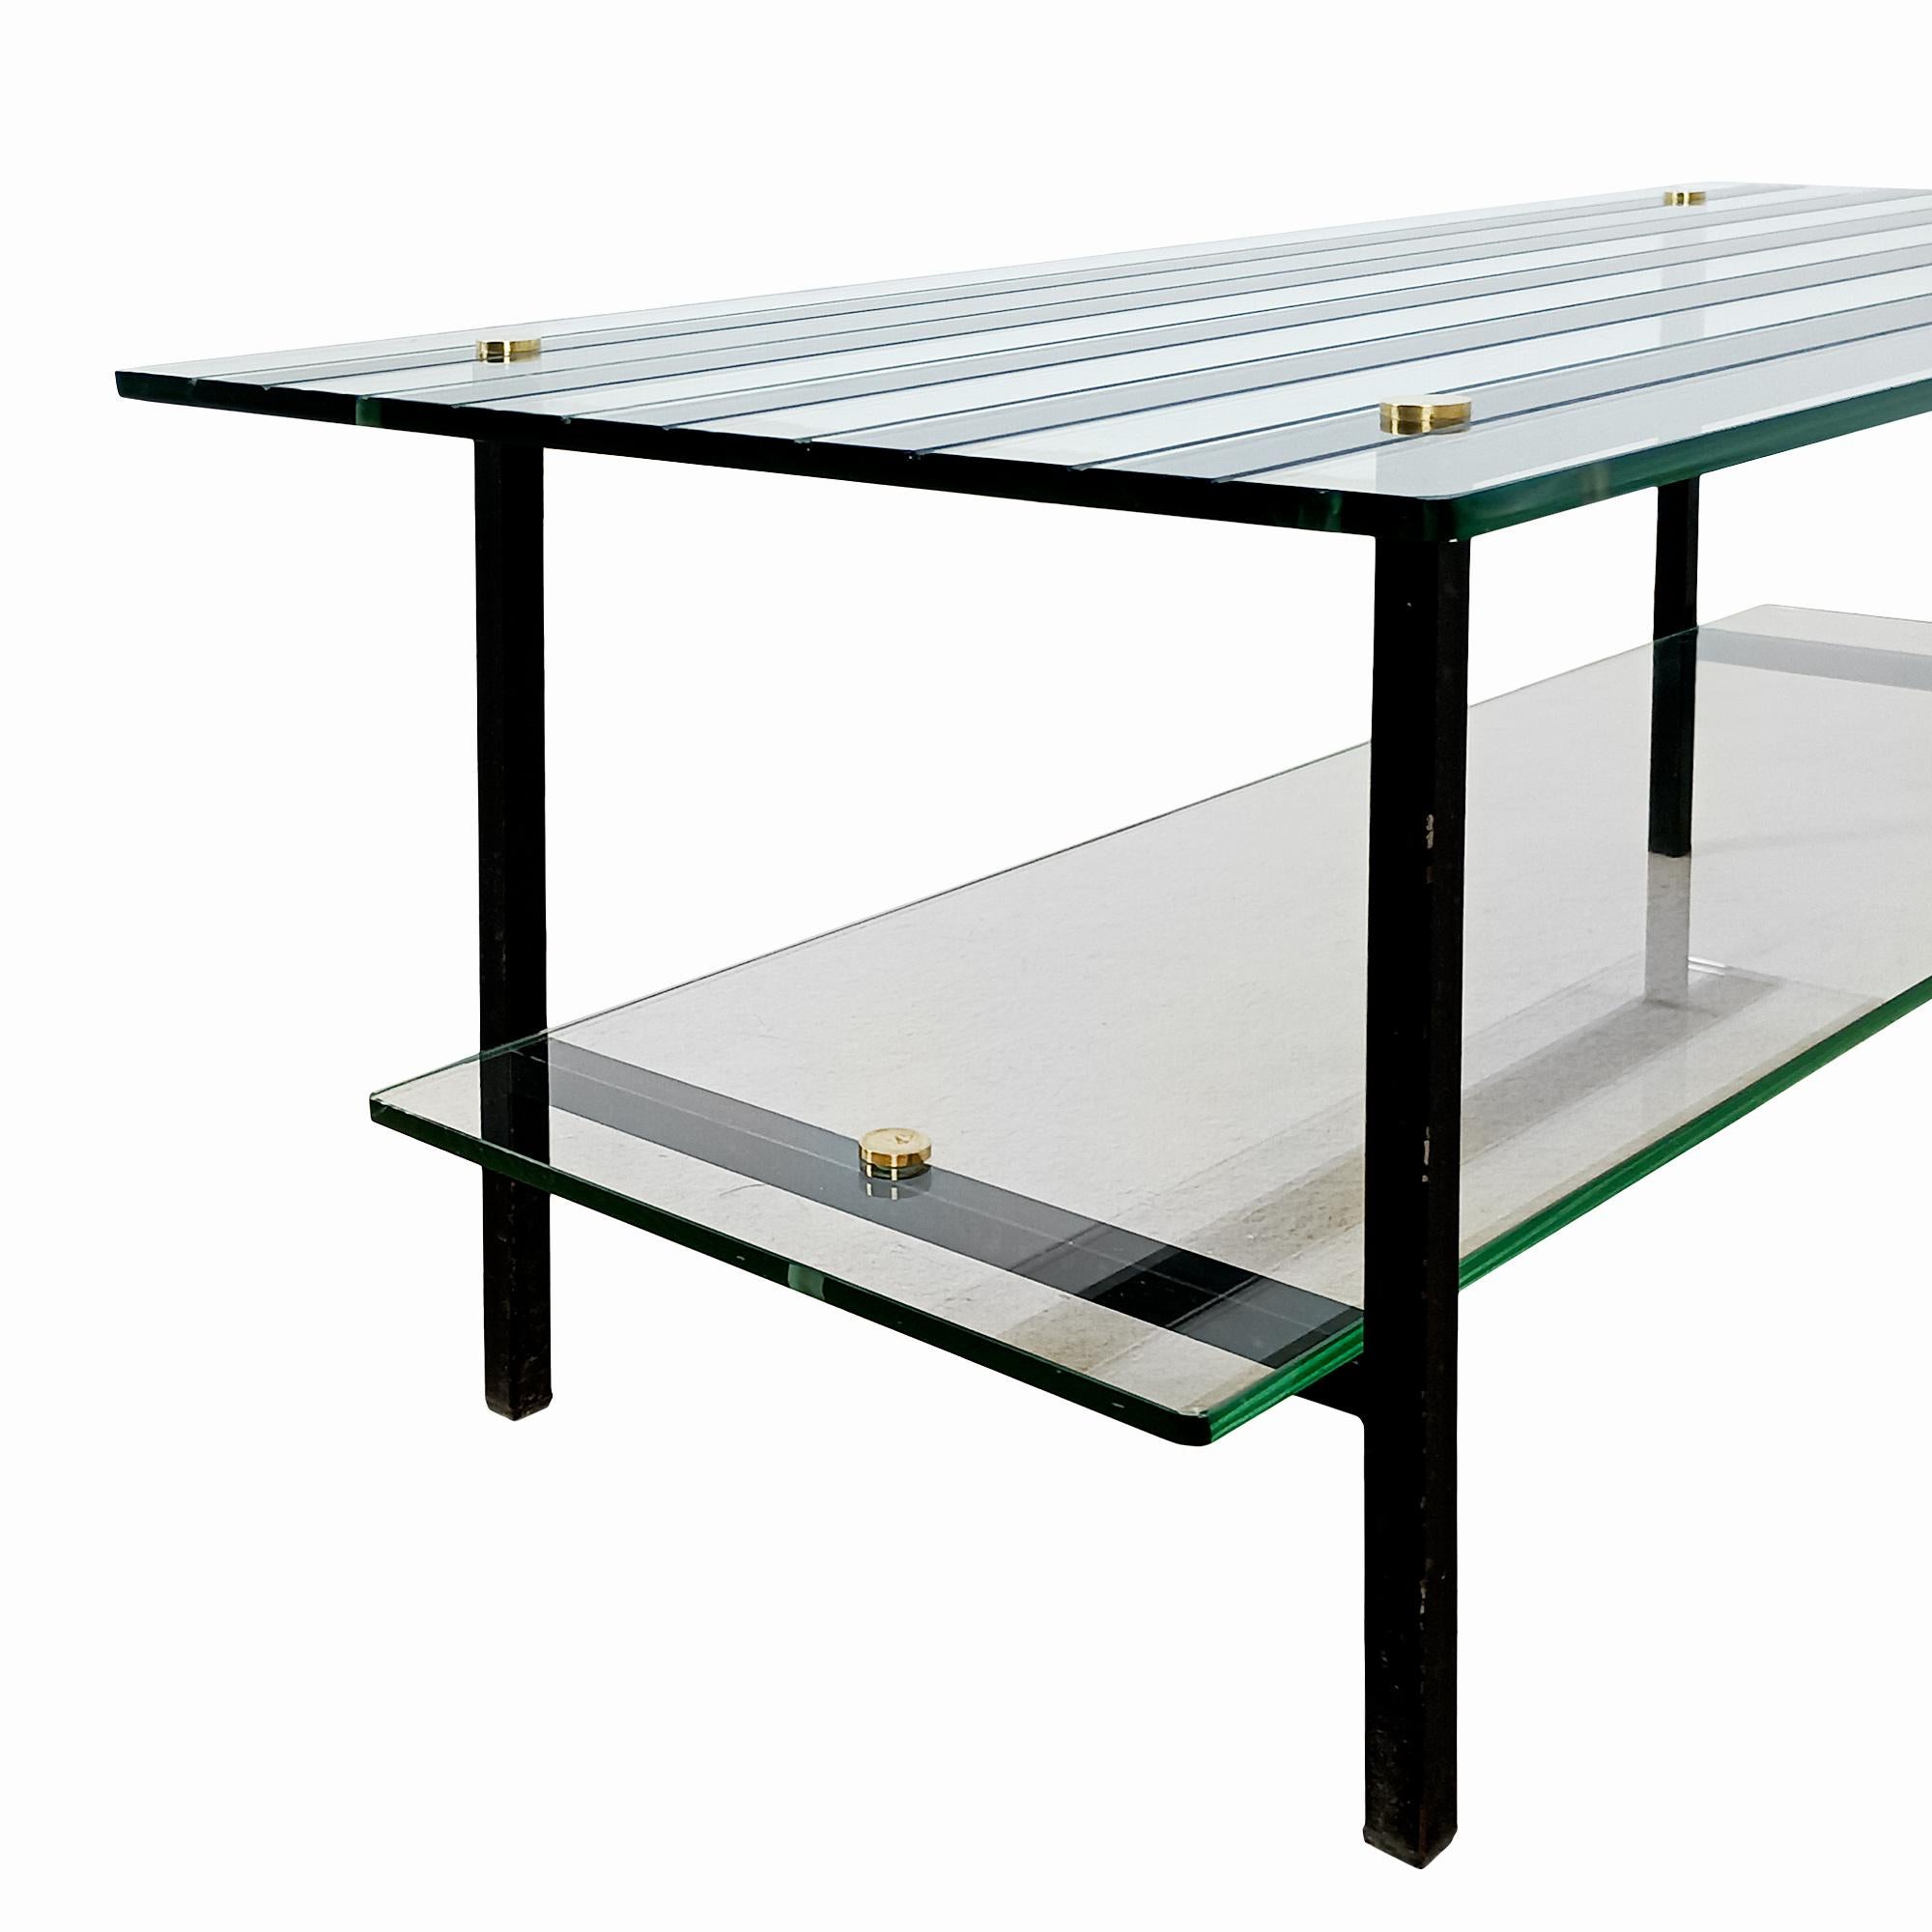 Mid-20th Century Mid-Century Modern Coffee Table With Steel Structure and Mirrored Glass - France For Sale